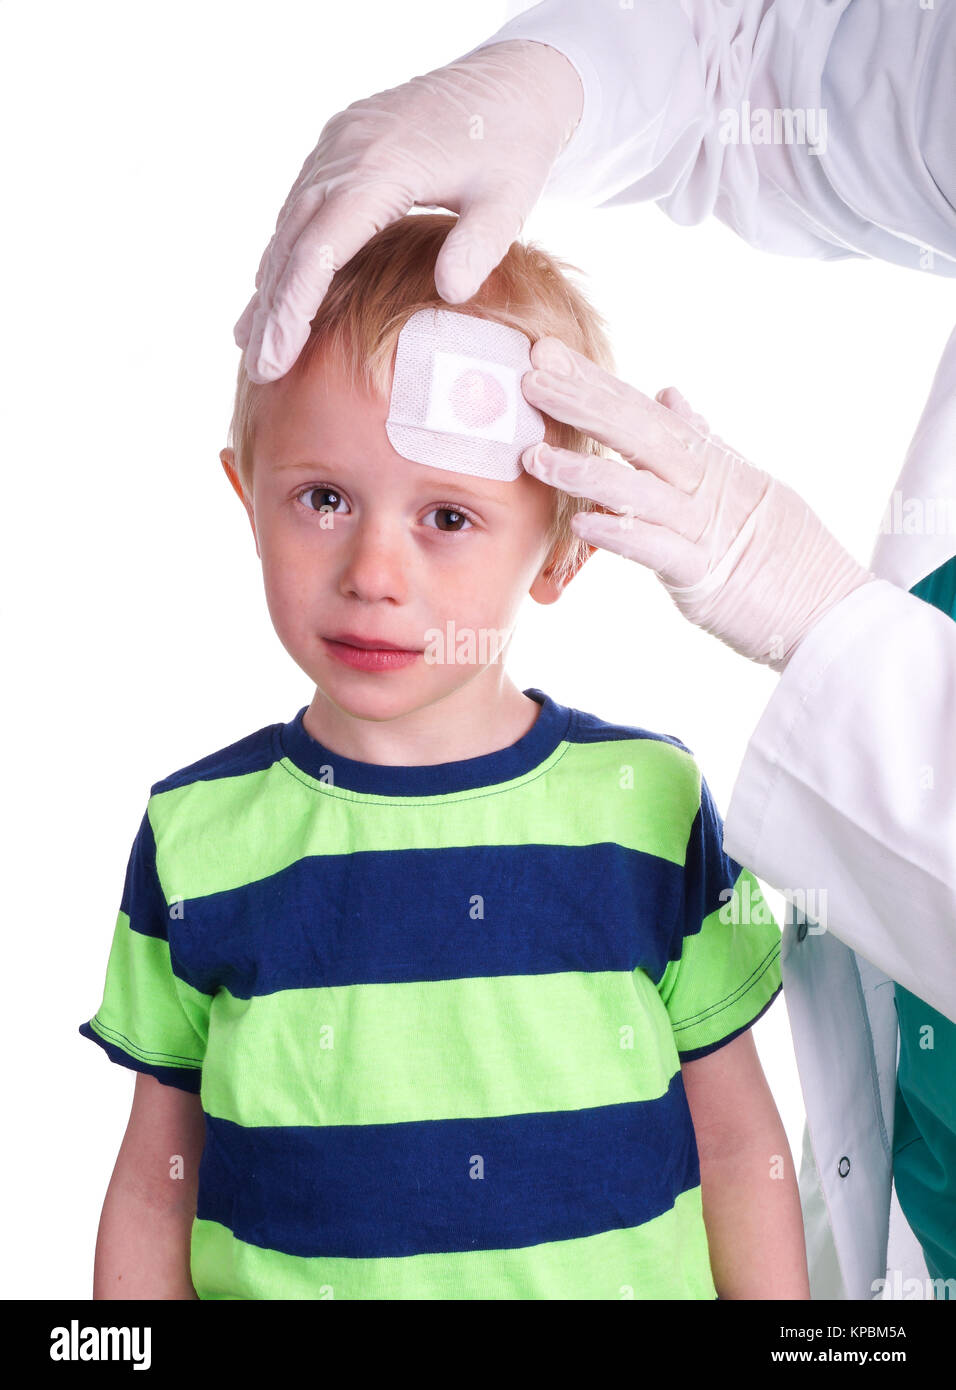 Boy has injury on forehead and gets help by the Doctor Stock Photo